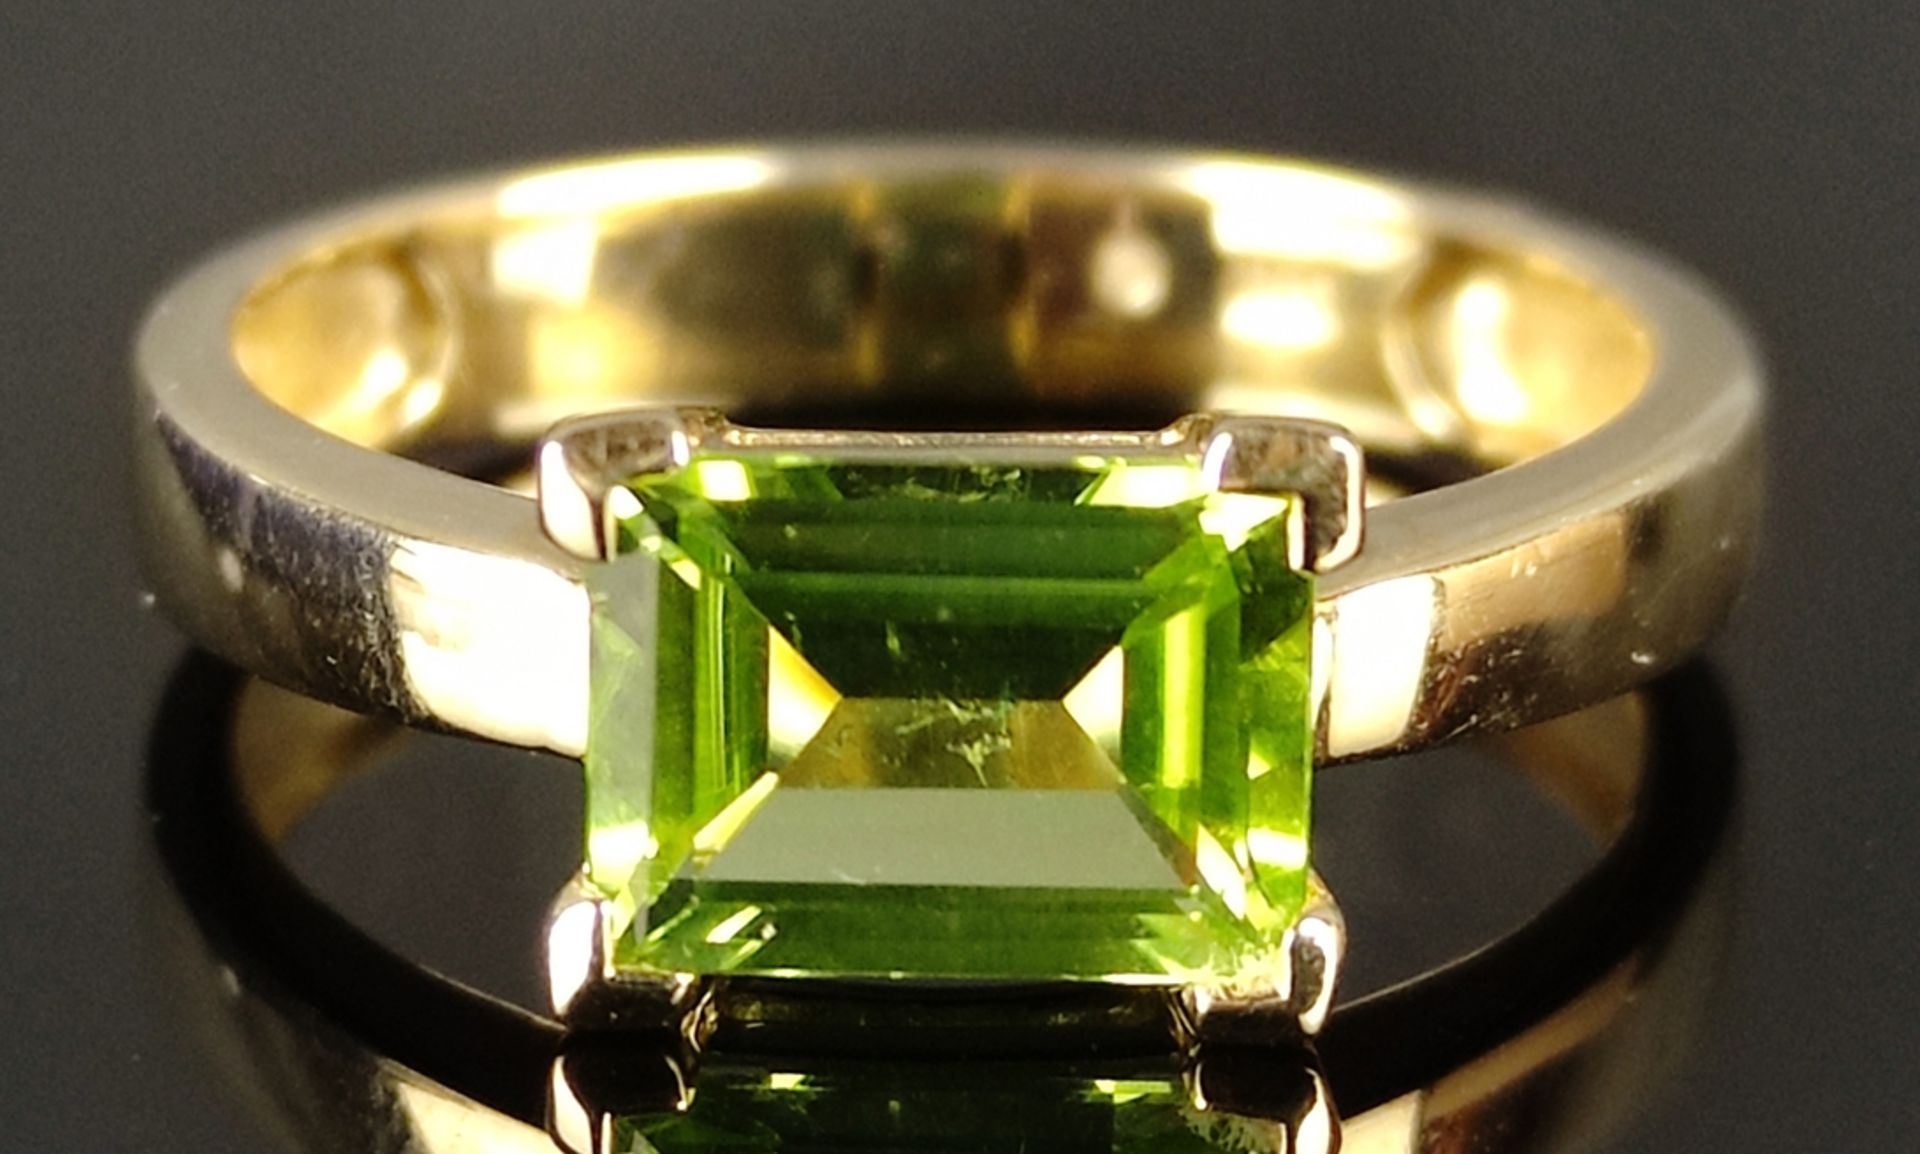 Bandring mit Peridot im Treppen-Schliff, 585/14K Gelbgold, 3g, Größe 55Band ring with staircase - Image 2 of 5